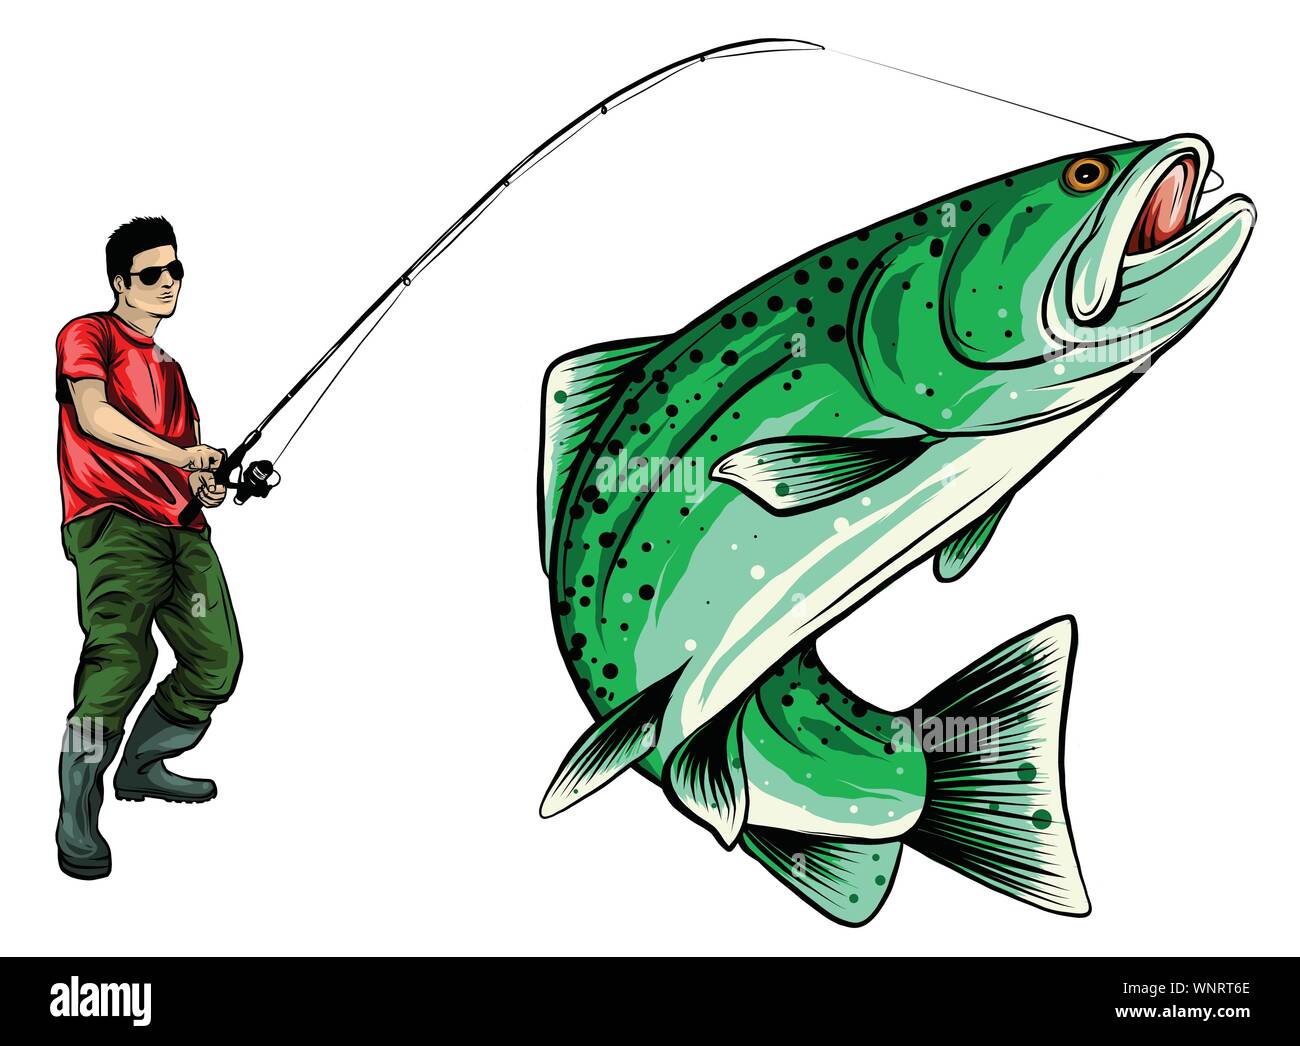 Fishing design for vector. A fisherman catches a boat on a wave